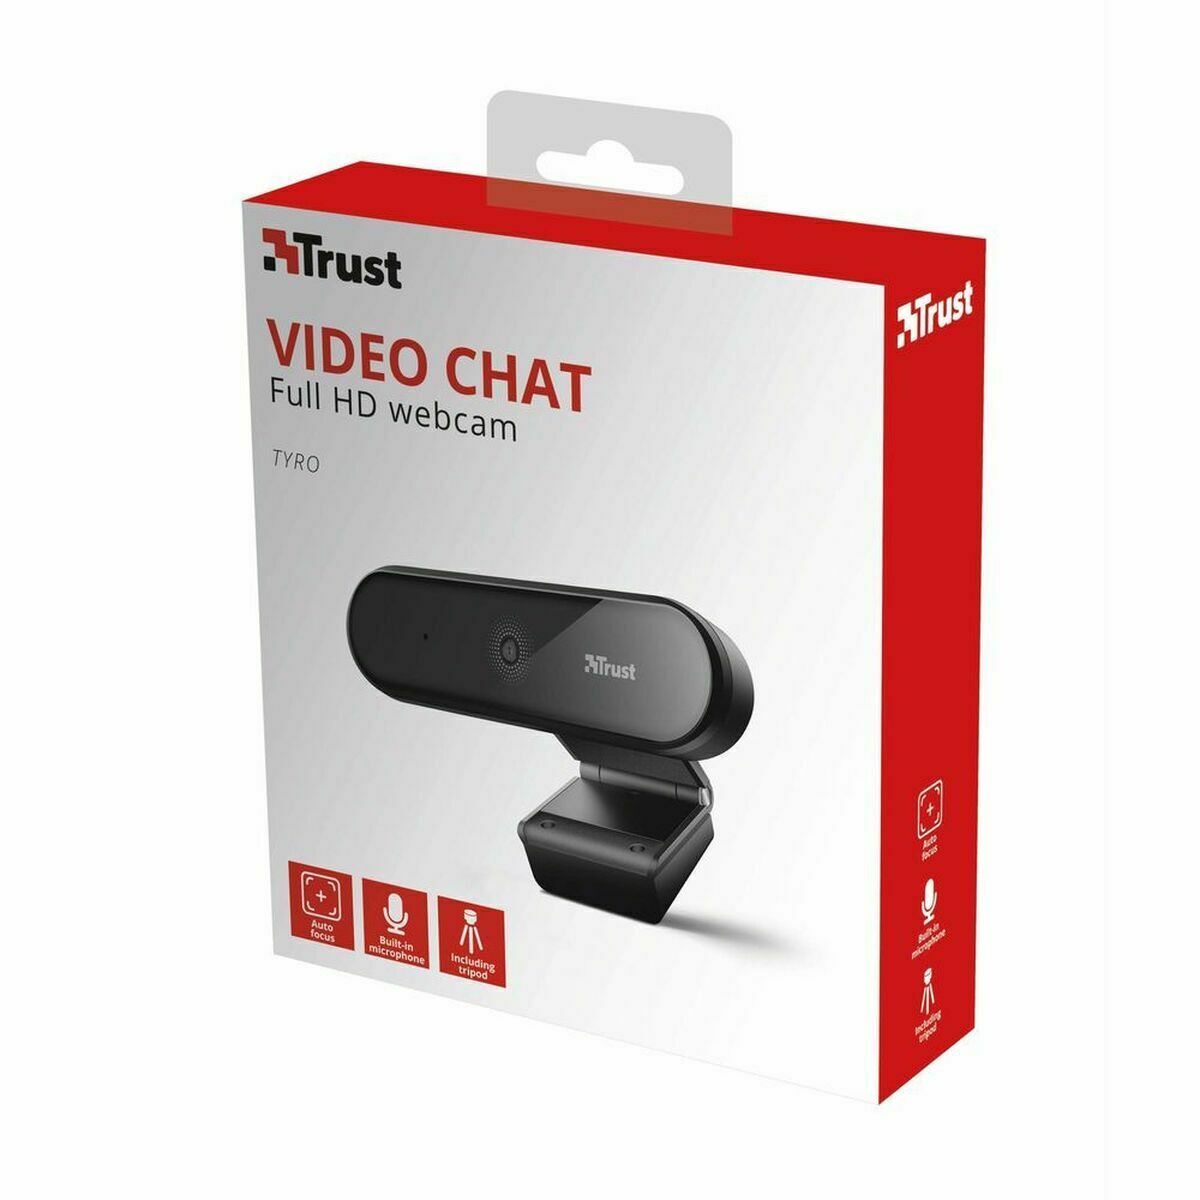 Webcam Trust 23637, Trust, Electronics, Plug & Play Games Consoles, webcam-trust-23638, Brand_Trust, category-reference-2609, category-reference-2642, category-reference-2844, category-reference-t-15259, category-reference-t-15260, category-reference-t-19653, category-reference-t-19672, category-reference-t-23628, computers / peripherals, Condition_NEW, entertainment, gaming, Price_20 - 50, RiotNook